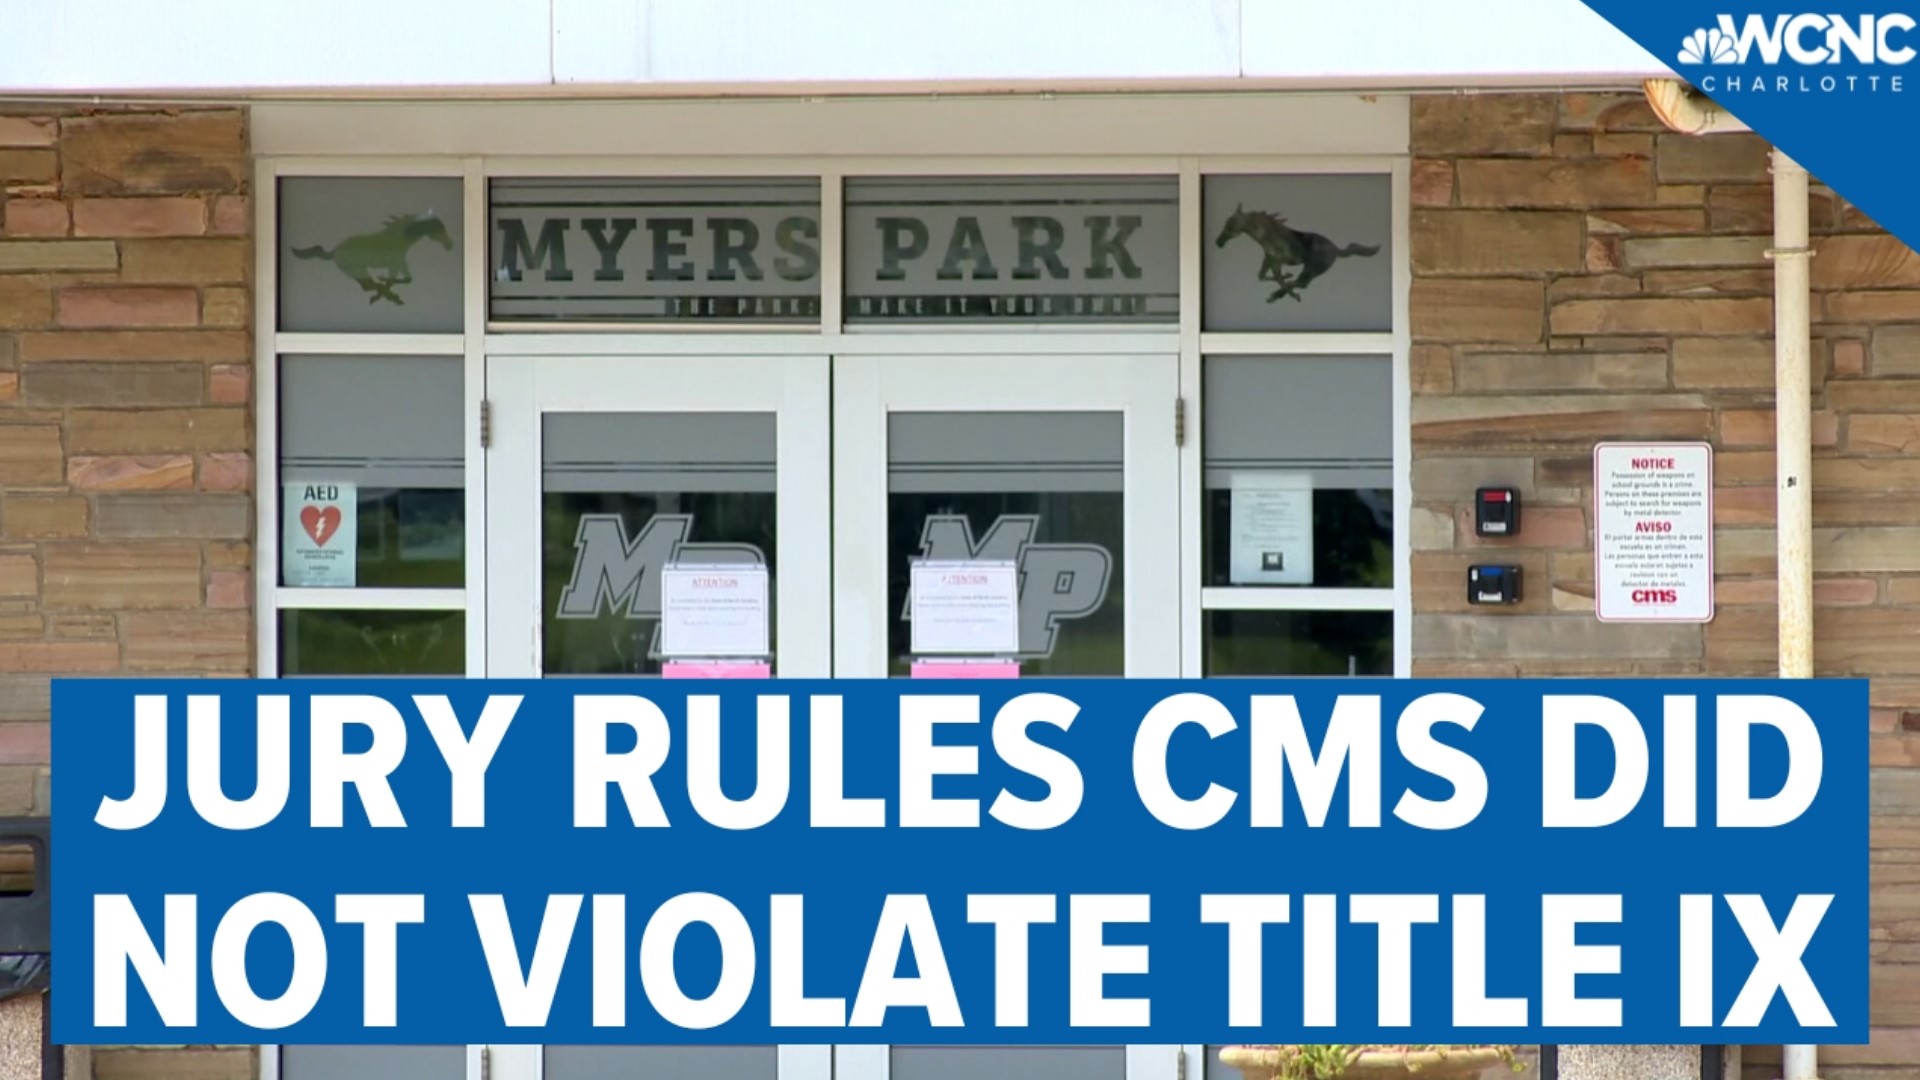 A jury who sat in the trial of a former Myers Park High School student against CMS BOE ruled CMS did not violate Title IX rights of the former student.